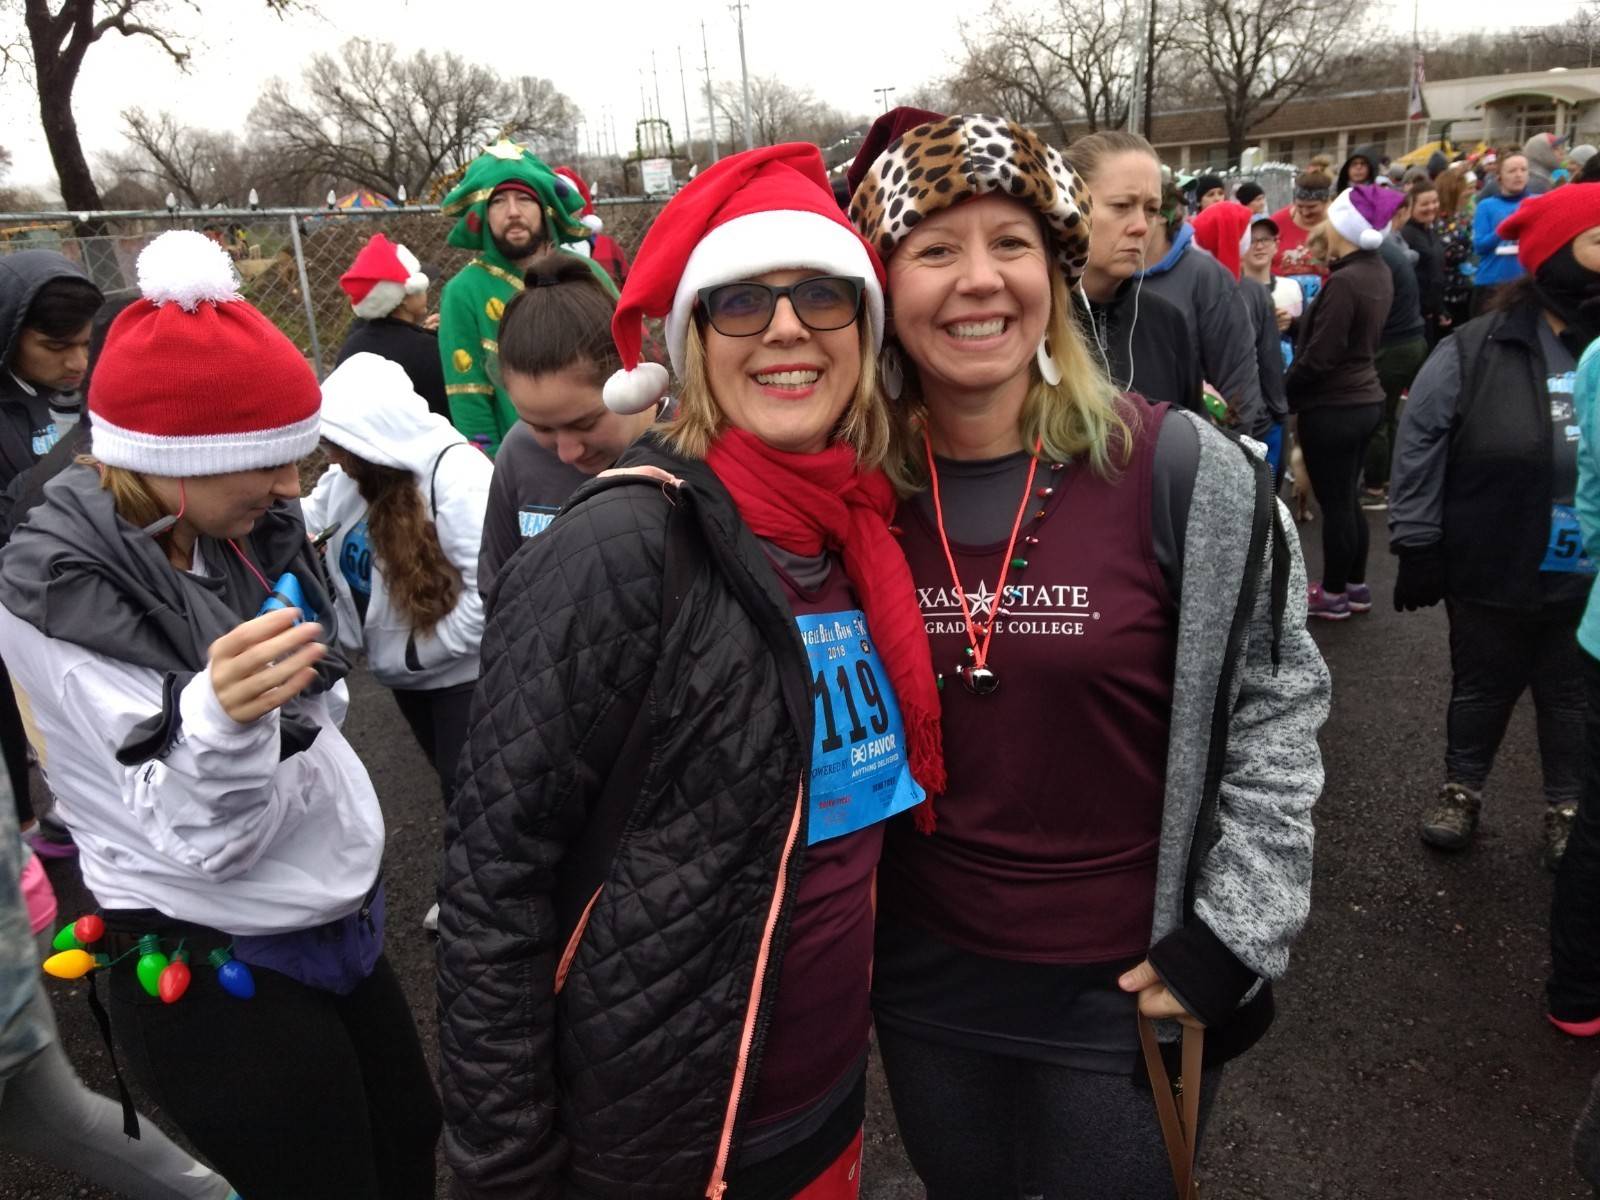 two runners wearing the Running With the Graduate Deans shirt and christmas hats